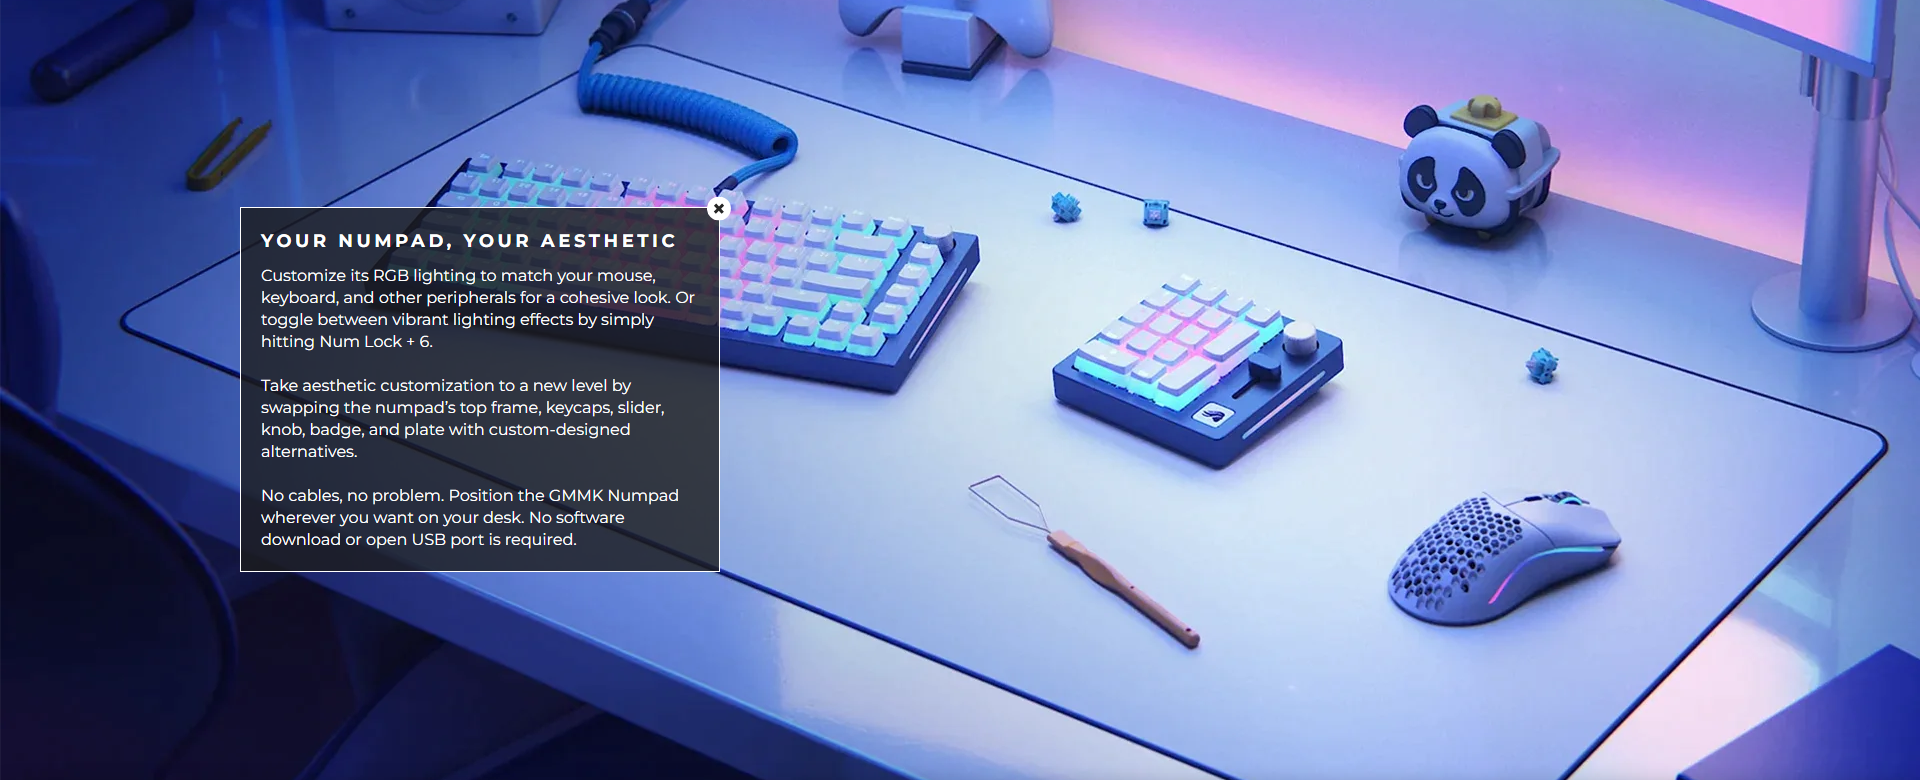 A large marketing image providing additional information about the product Glorious Prebuilt Mechanical Numpad - White Ice - Additional alt info not provided